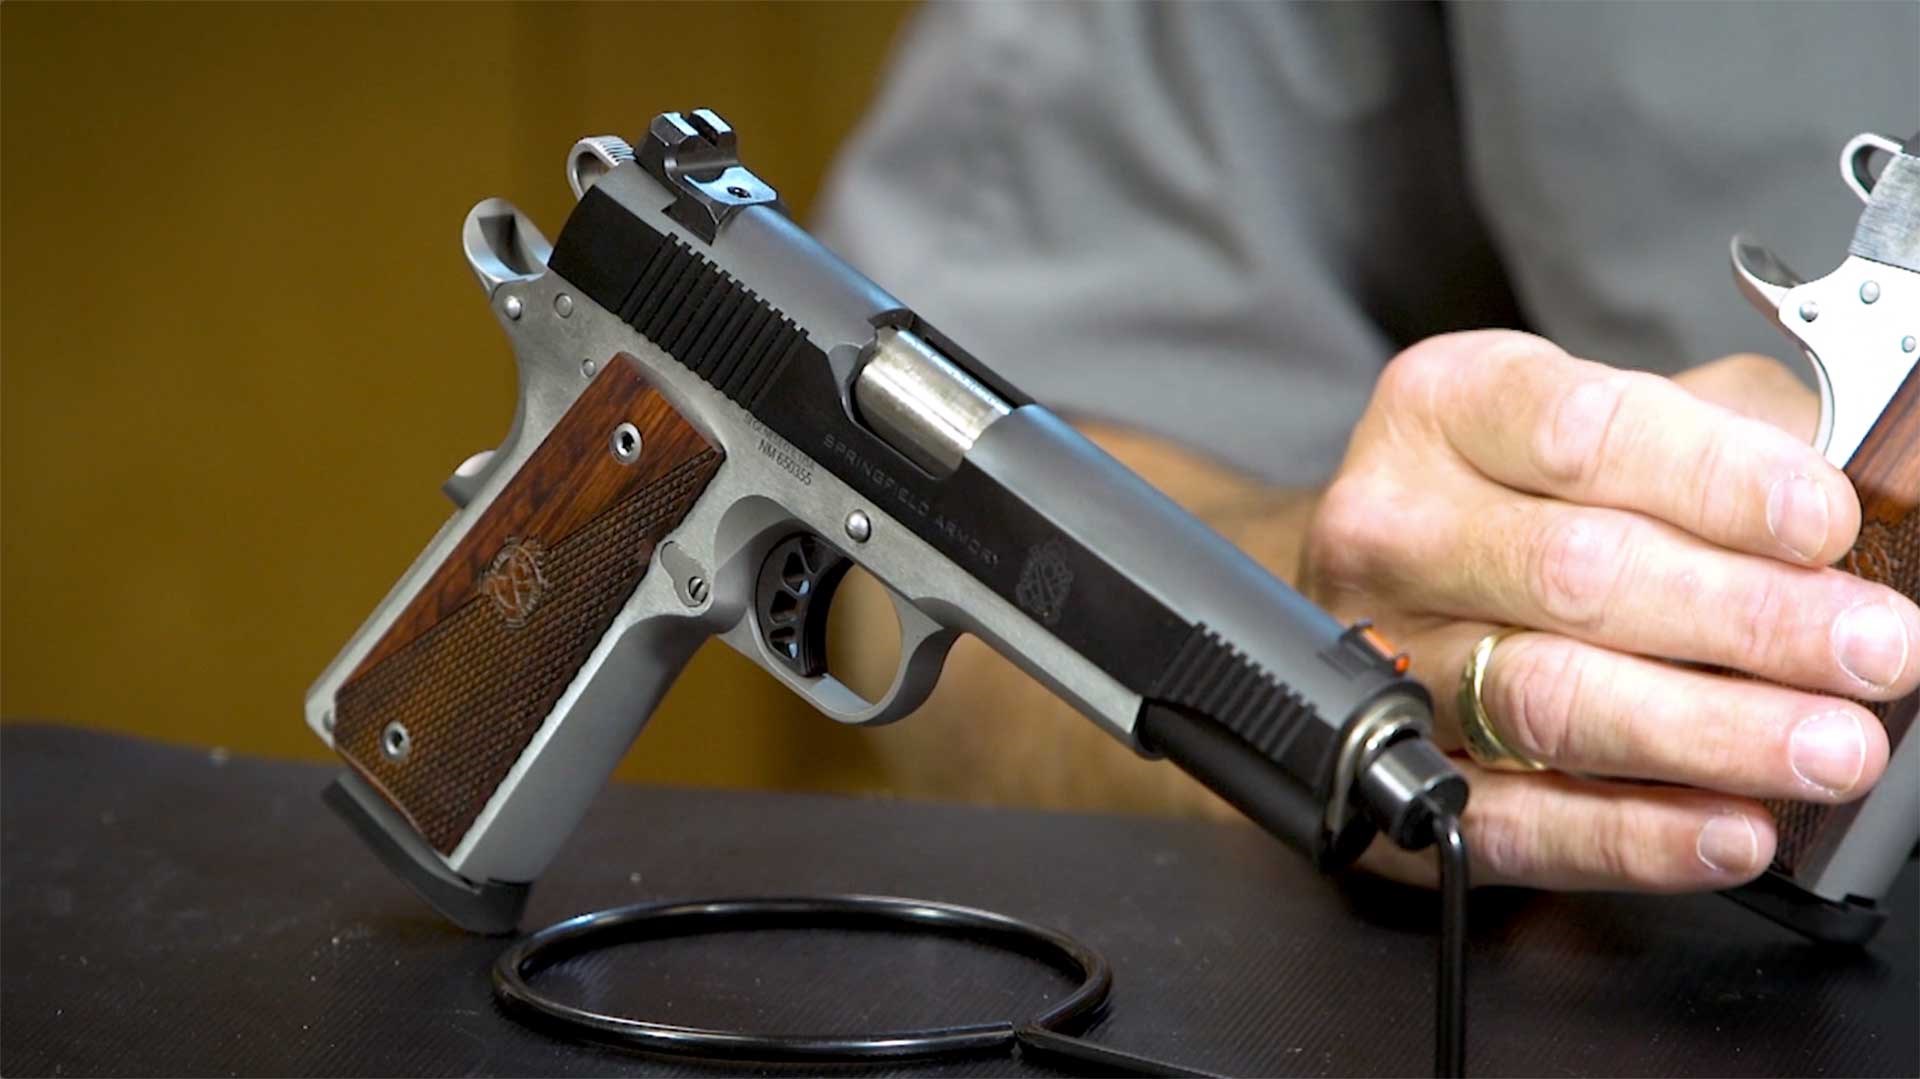 Full-size Springfield Armory Ronin 1911 shown on a table with a hand in the background.